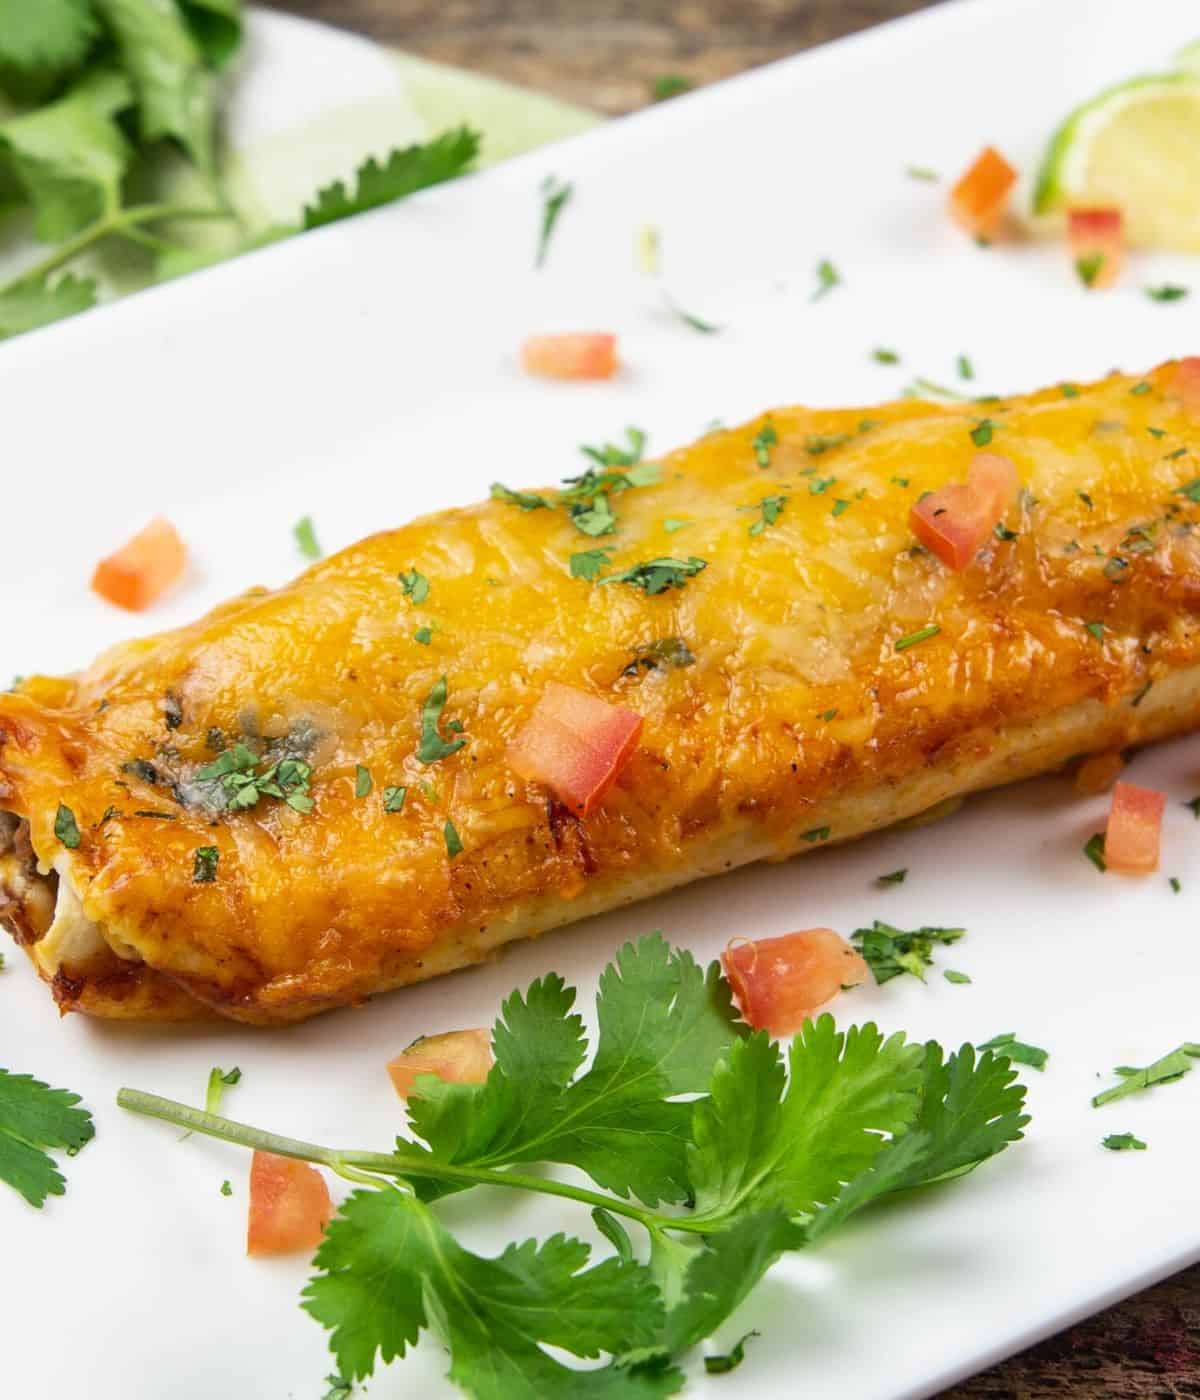 A beef enchilada in a plate with fresh cilantro and diced tomatoes